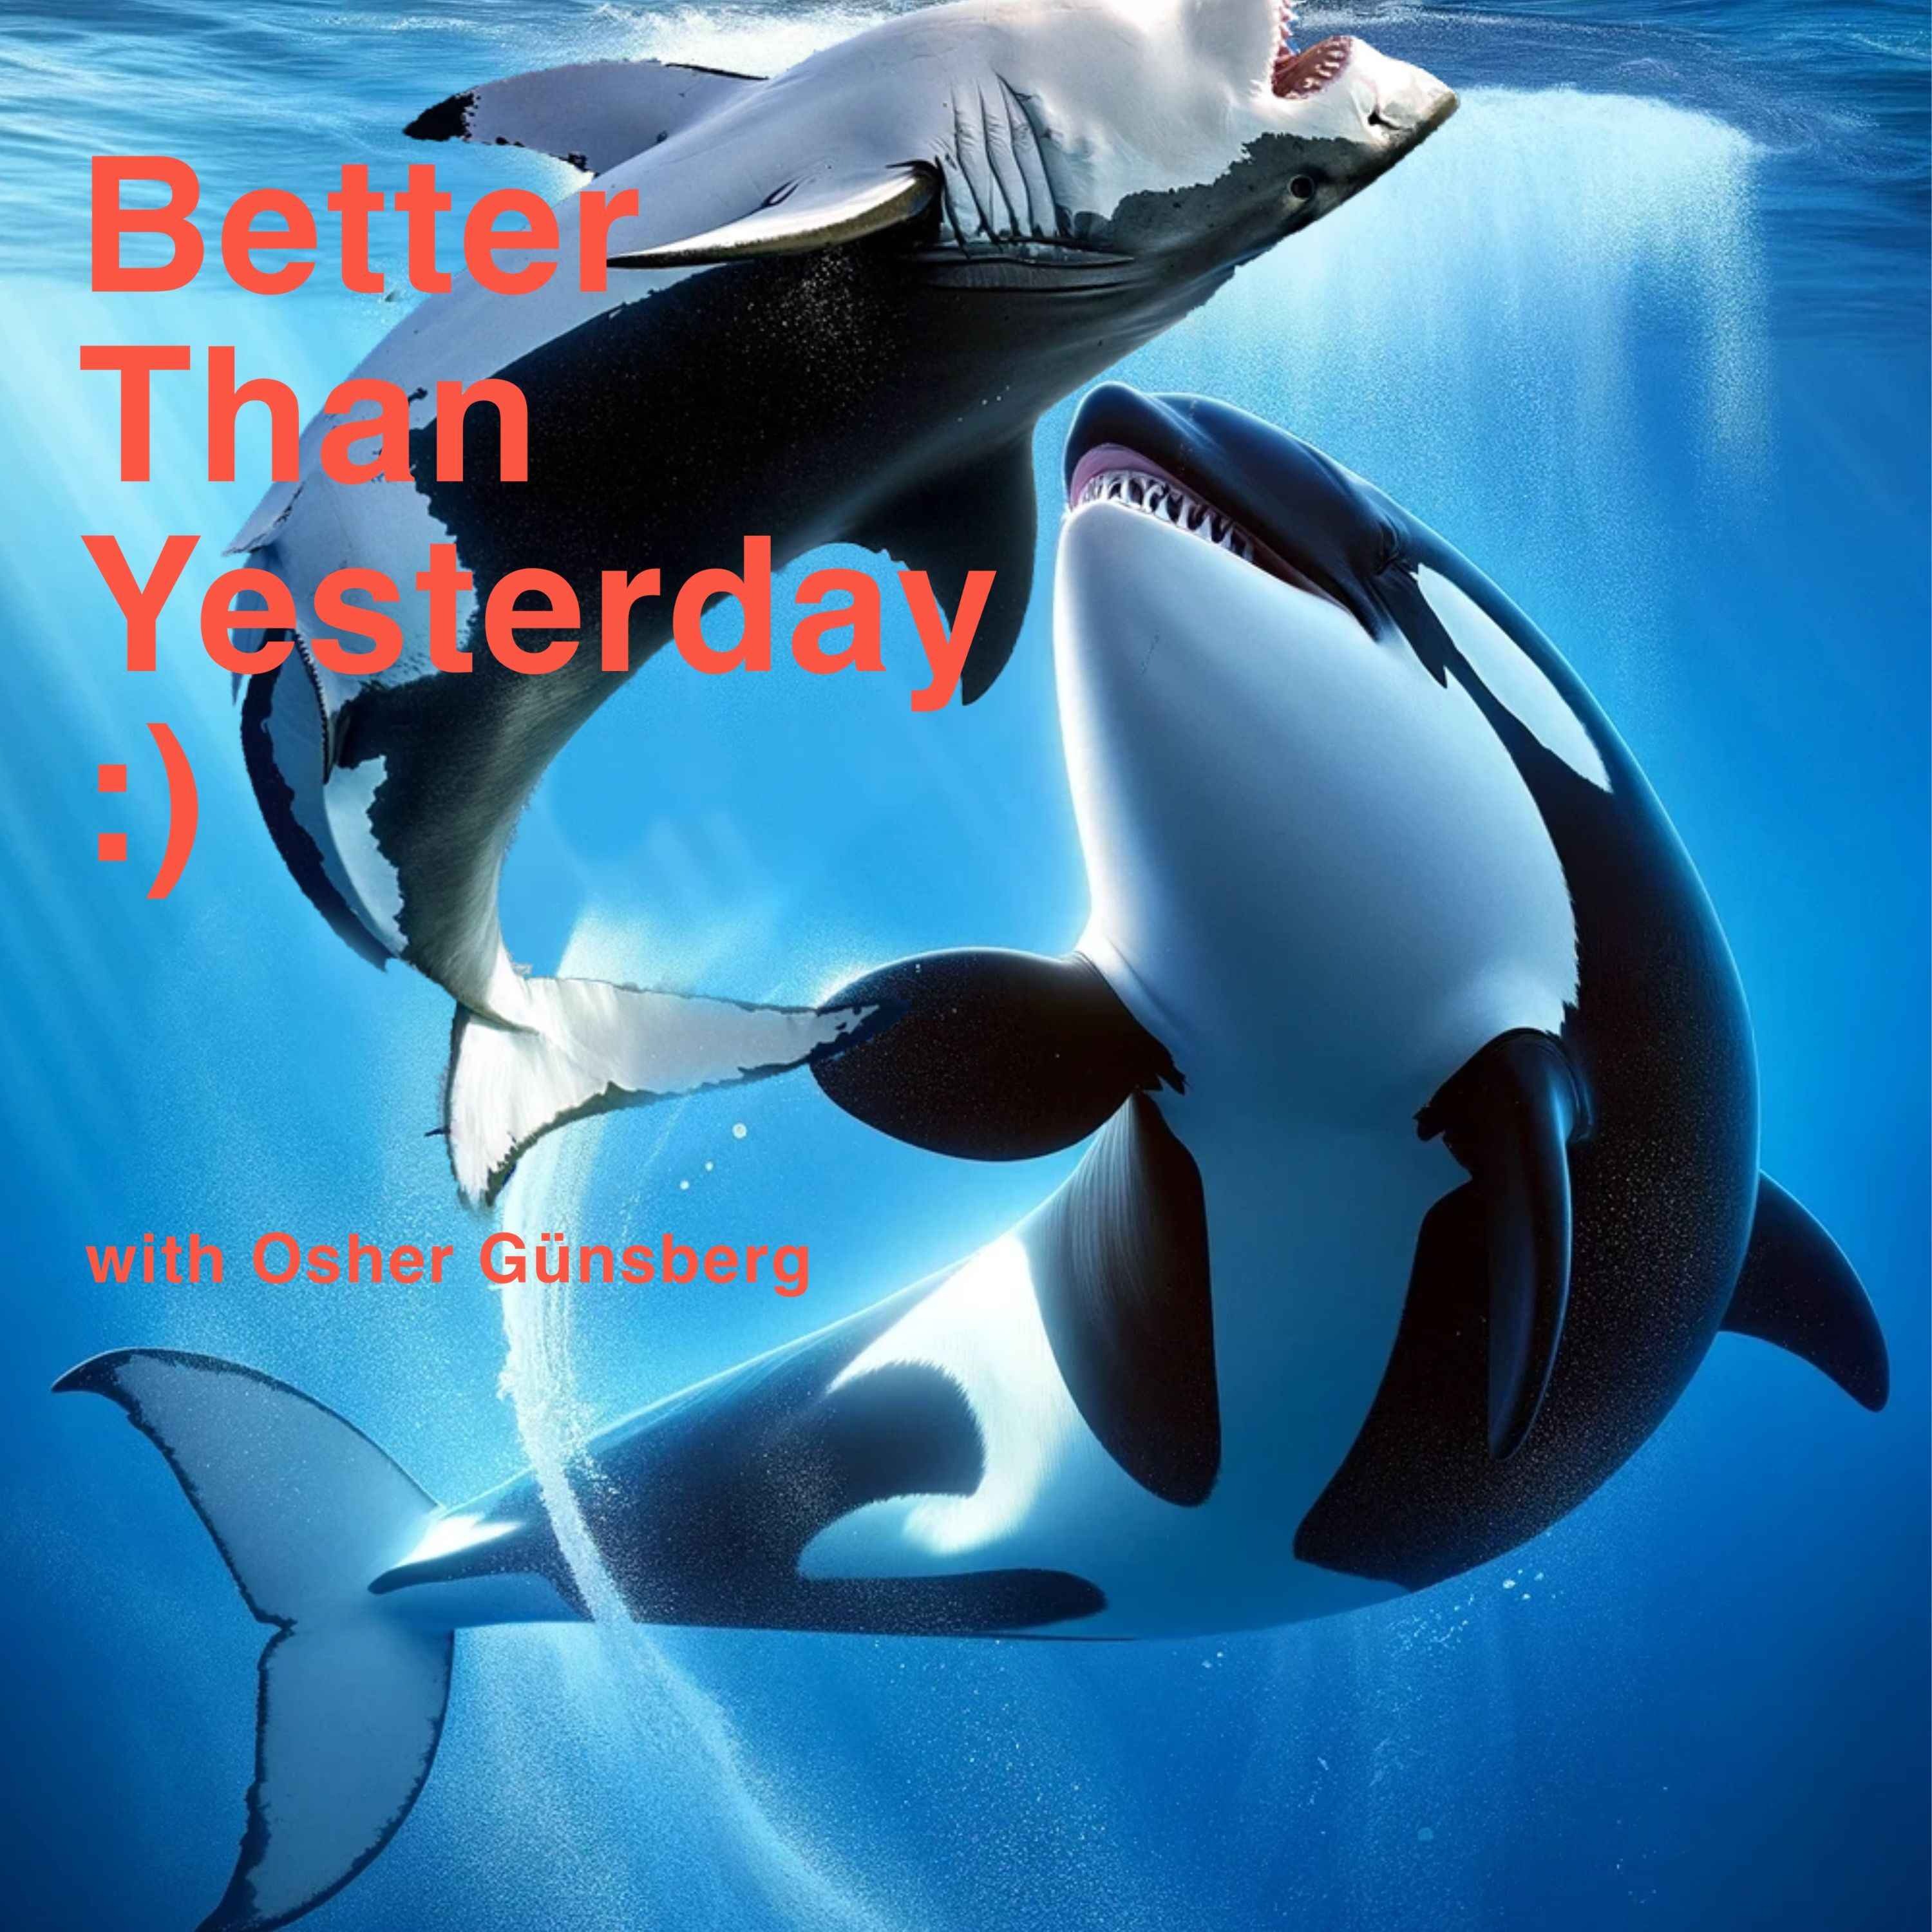 cover art for The freeze response, tonic immobility in sharks, and what to do about it (unless you're being hunted by an Orca)